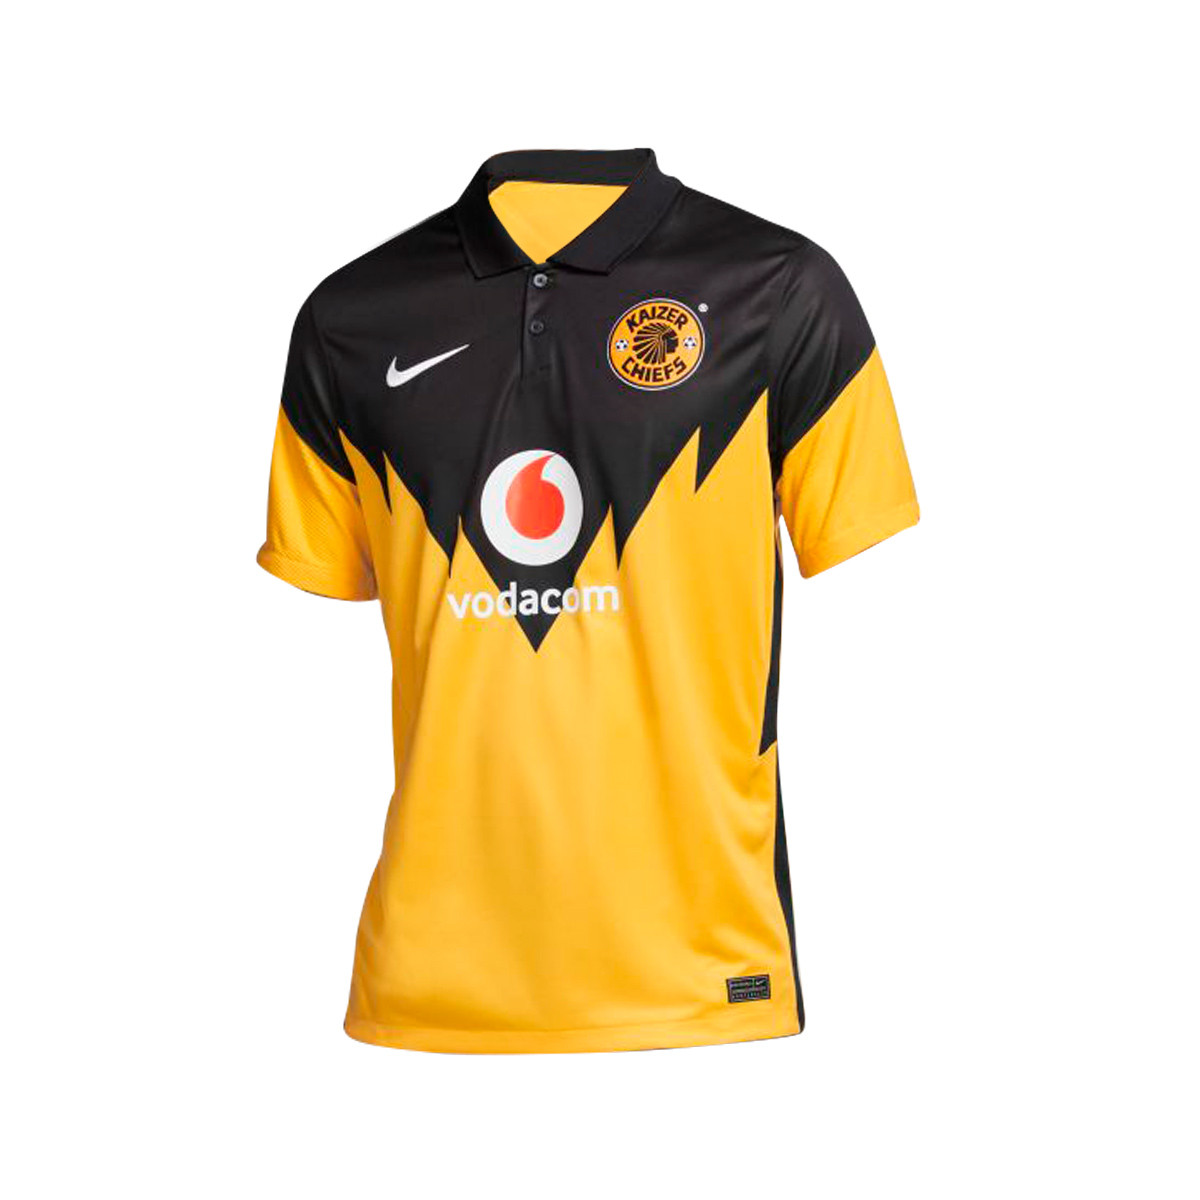 kaizer chiefs kit for sale